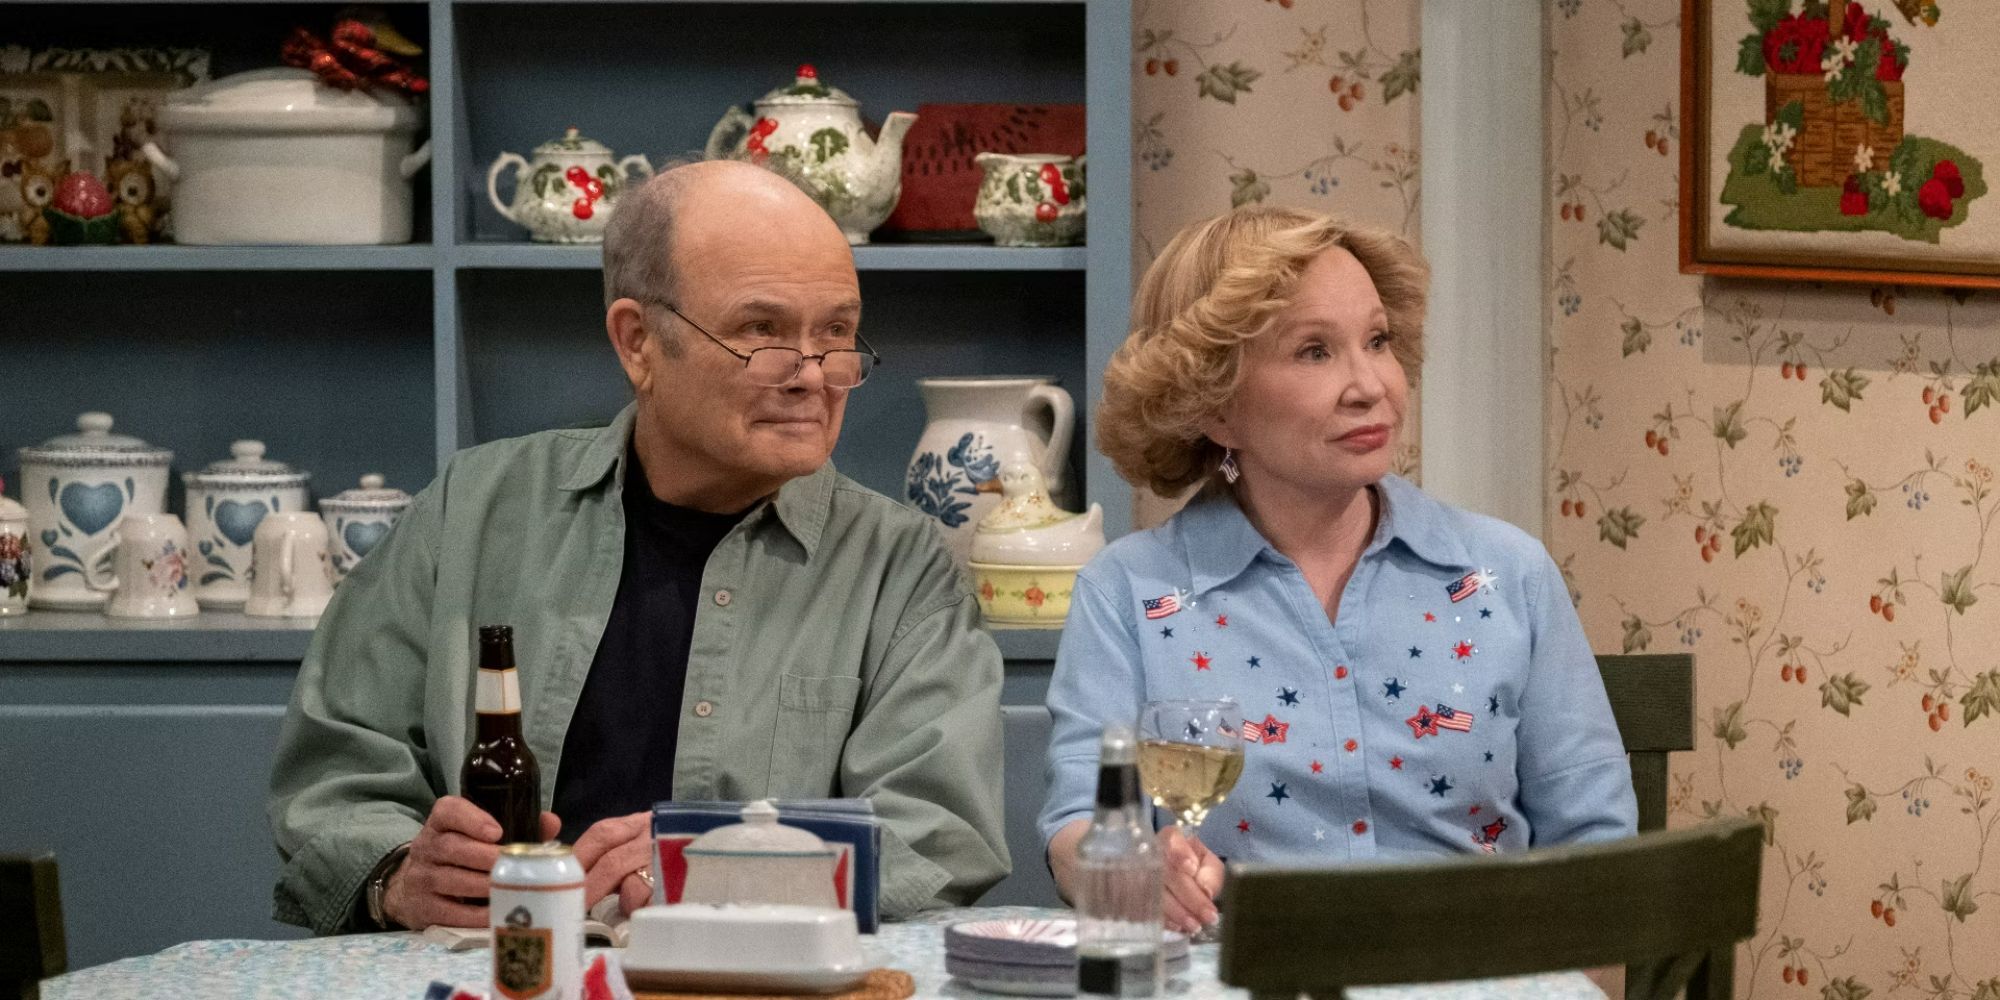 That '90s Show stars Kurtwood Smith and Debra Jo Rupp as Red and Kitty Forman looking up suspiciously from the kitchen table